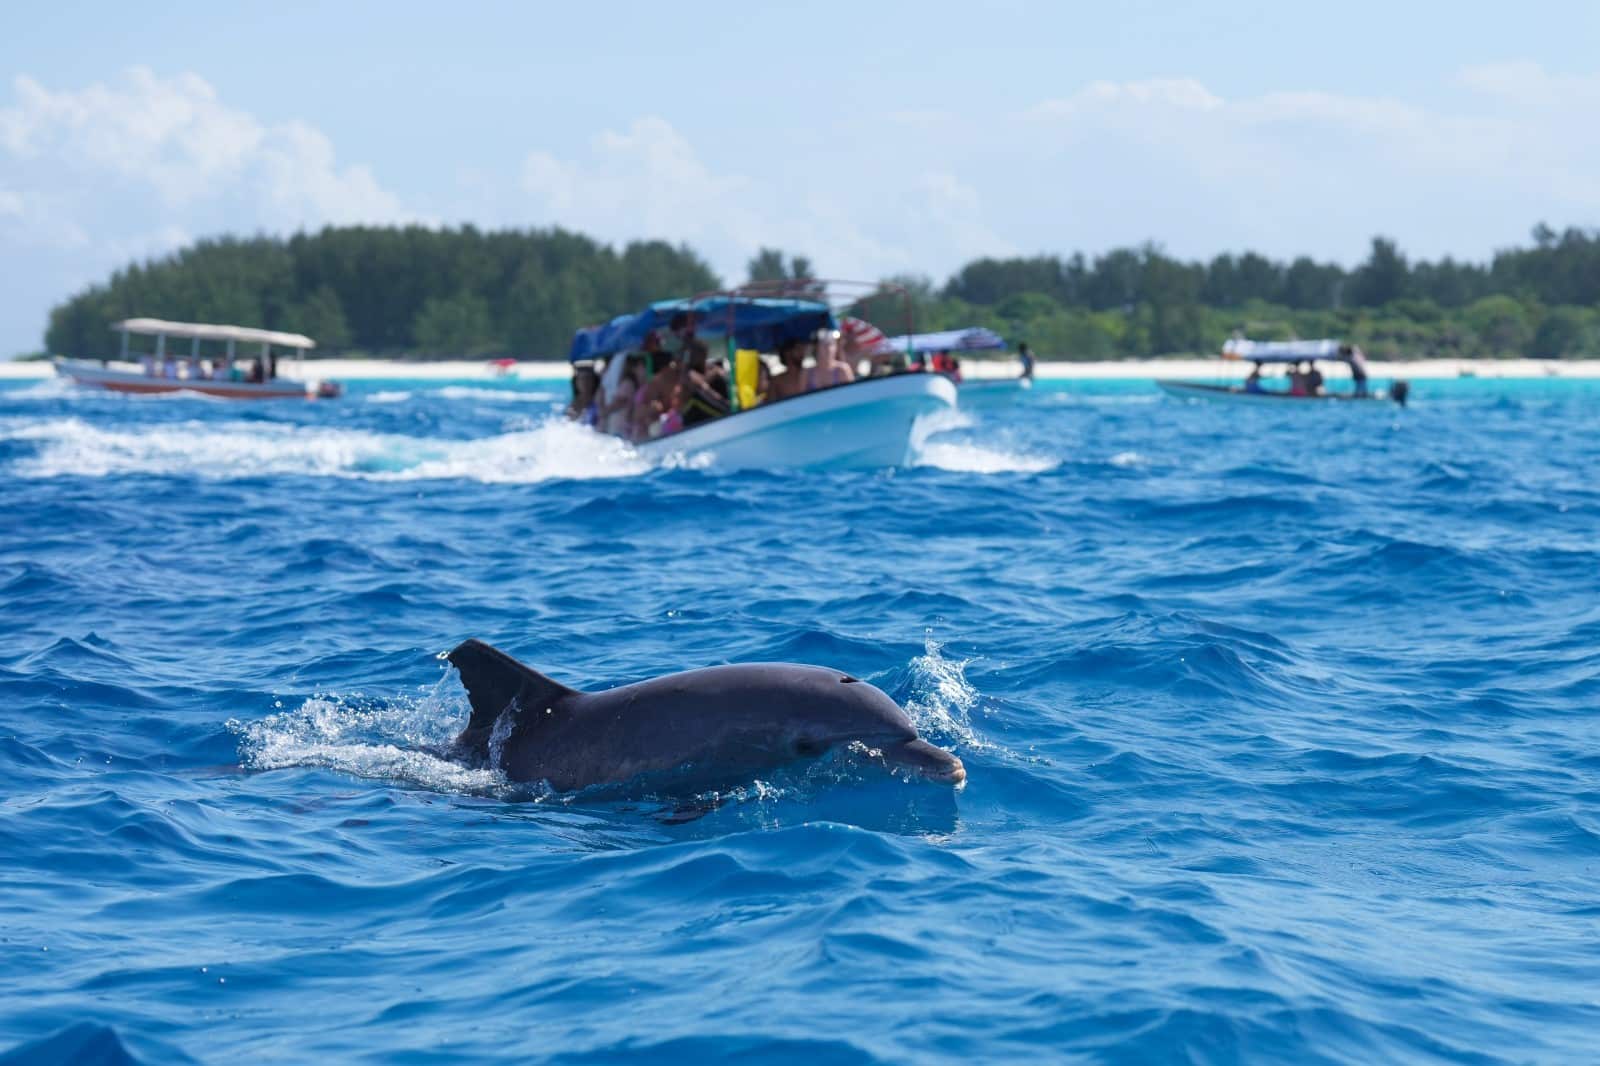 <p><span>Kizimkazi, on the southern coast of Zanzibar, is famous for its dolphin tours, offering the chance to swim with these playful marine creatures in their natural habitat. The experience of interacting with dolphins in the open ocean is both thrilling and humbling.</span></p> <p><span>Besides dolphins, the area’s crystal-clear waters are perfect for snorkeling and exploring the vibrant coral reefs. Responsible tour operators ensure that the dolphins are not harassed, making for an ethical wildlife encounter.</span></p> <p><b>Insider’s Tip: </b><span>Choose an eco-friendly tour operator that respects wildlife and avoids chasing or harassing the dolphins.</span></p> <p><b>When To Travel: </b><span>Dolphin sightings are common year-round, but the best sea conditions are from August to October.</span></p> <p><b>How To Get There: </b><span>Kizimkazi is about an hour’s drive from Stone Town. Organized tours usually include hotel pick-up and drop-off.</span></p>